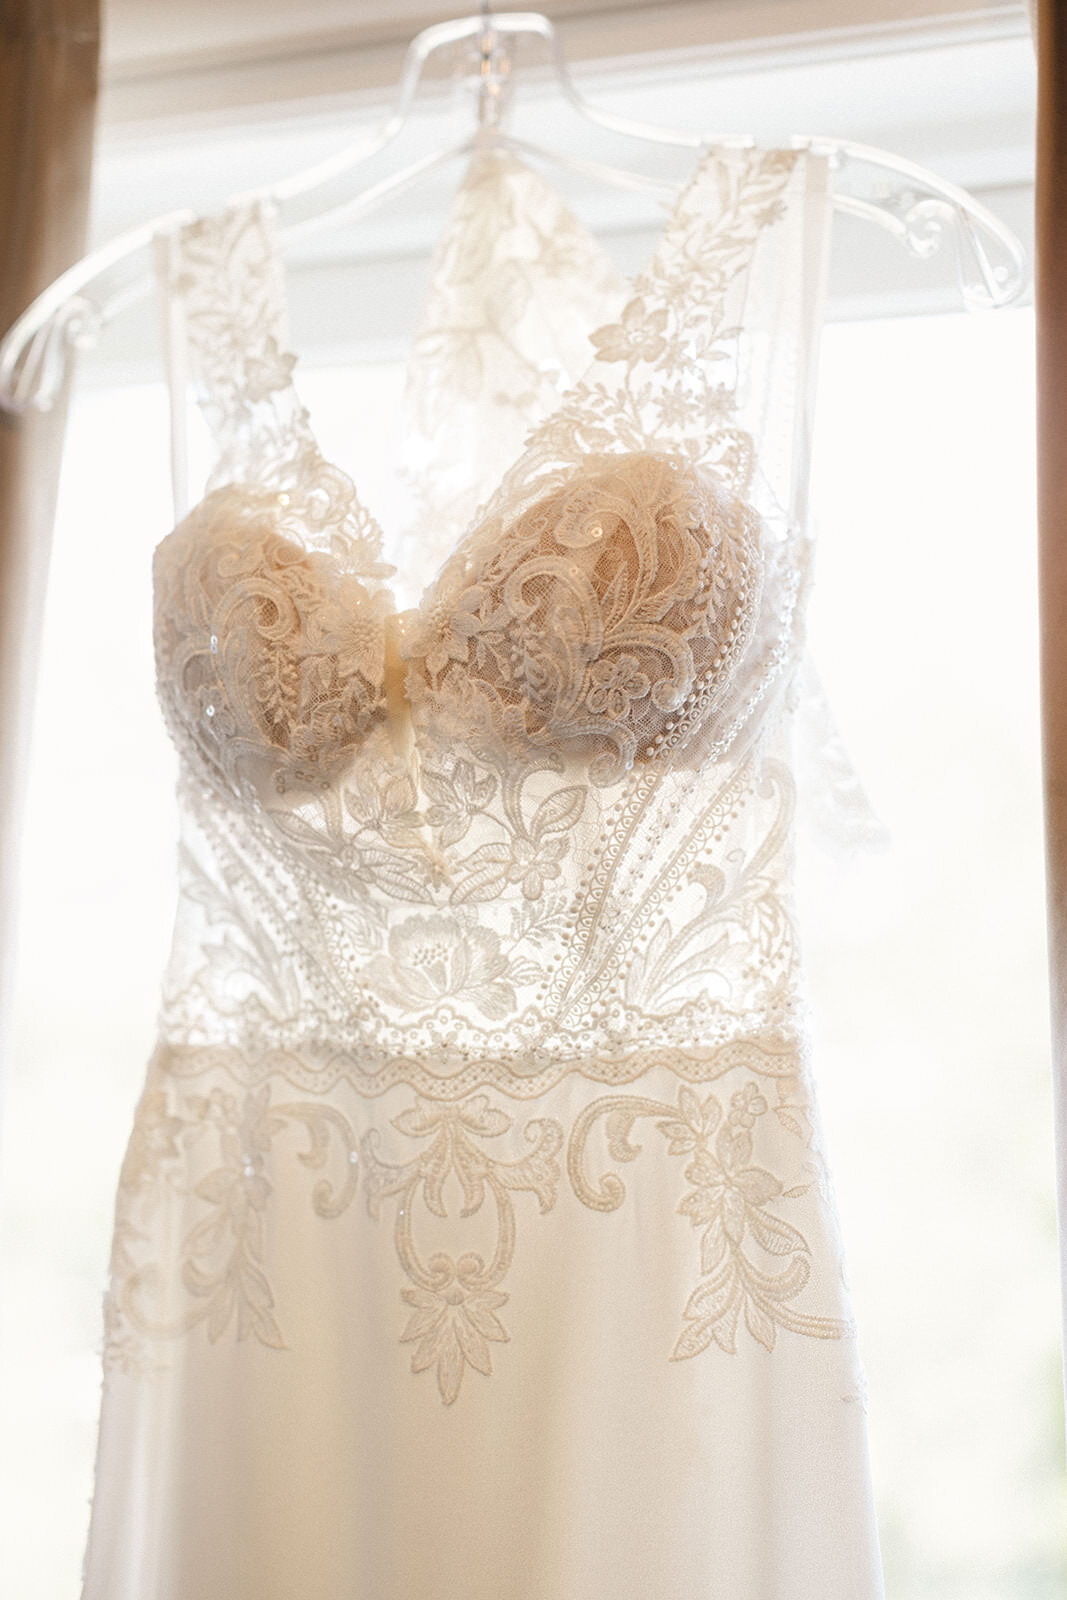 An elegant white wedding dress with lace detailing hanging in front of a window, radiating with natural light.